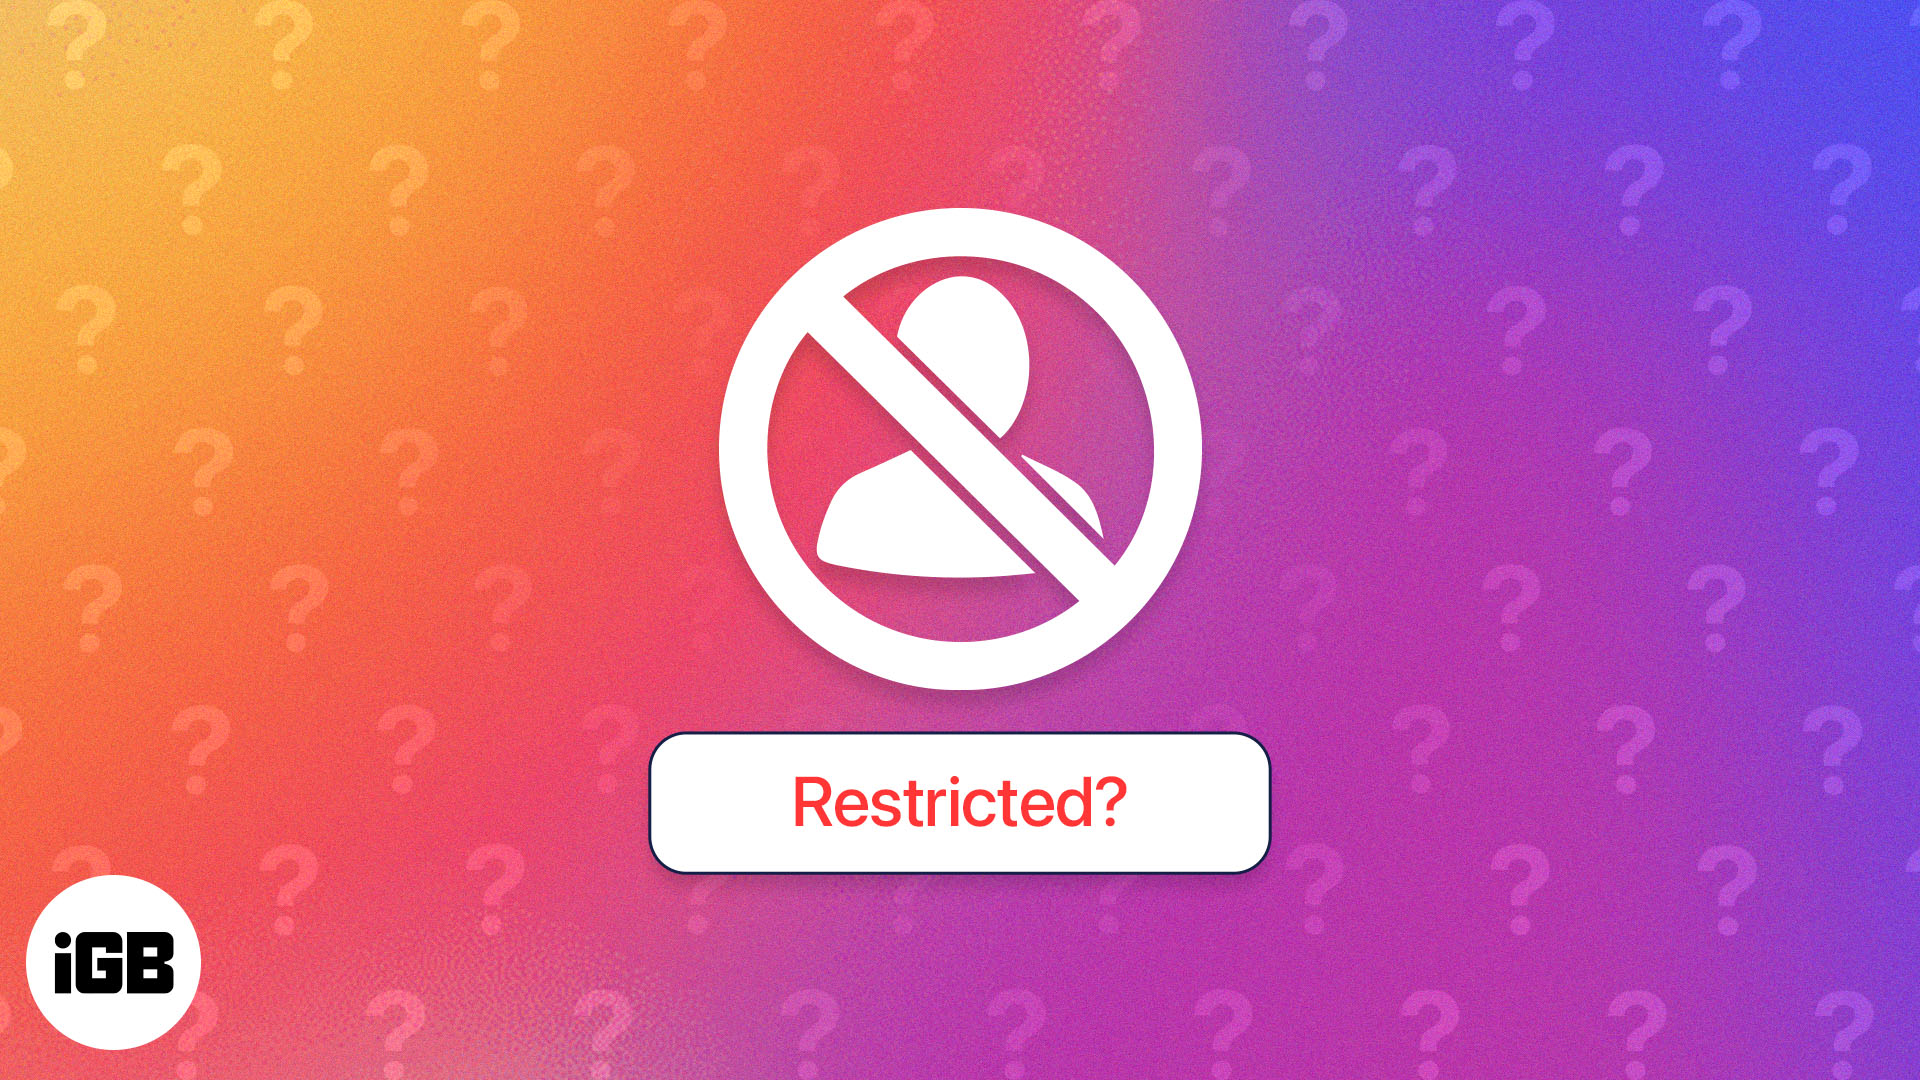 What happens when you restrict someone on Instagram